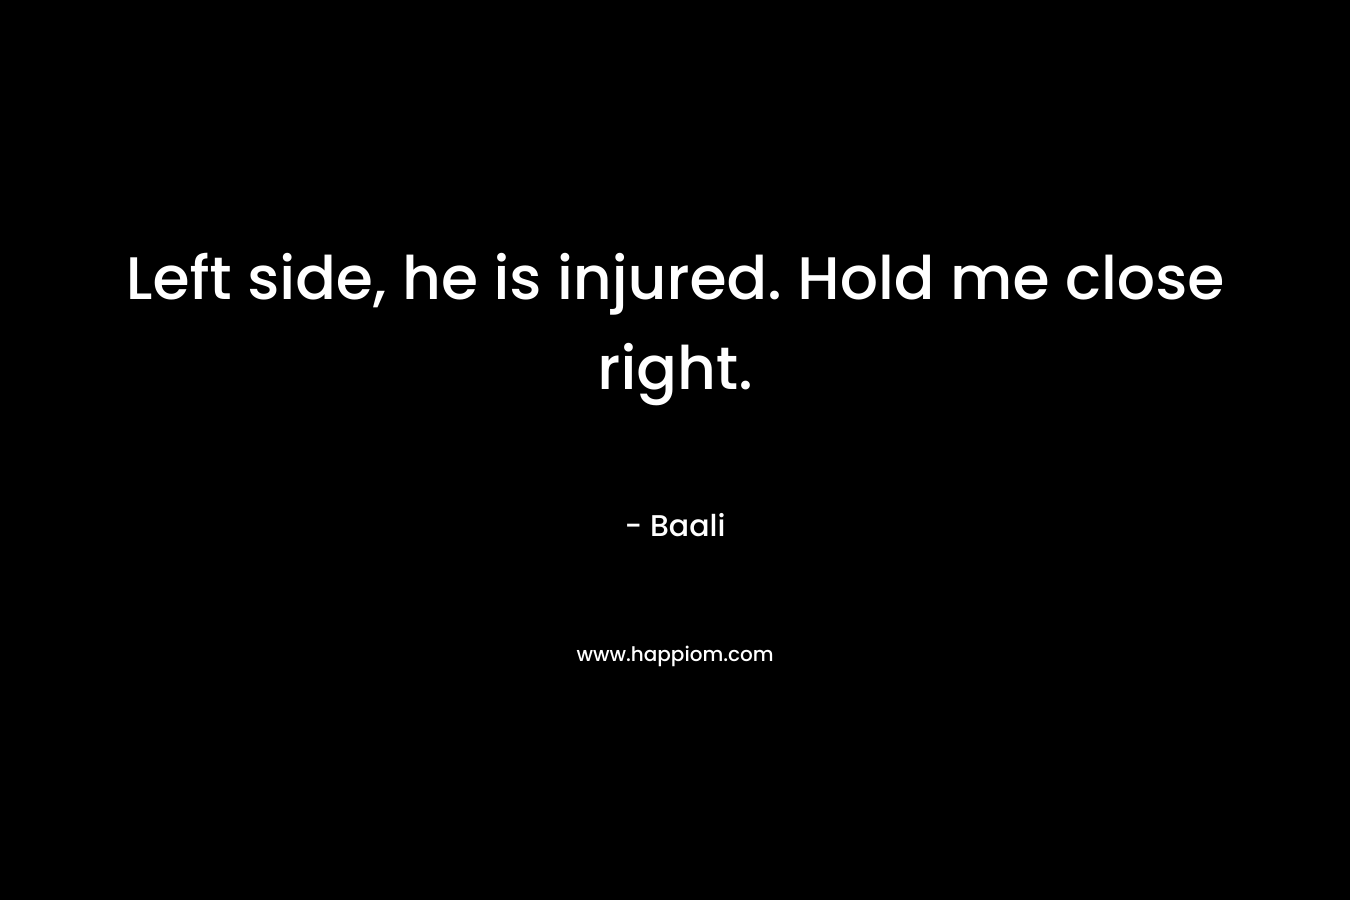 Left side, he is injured. Hold me close right. – Baali